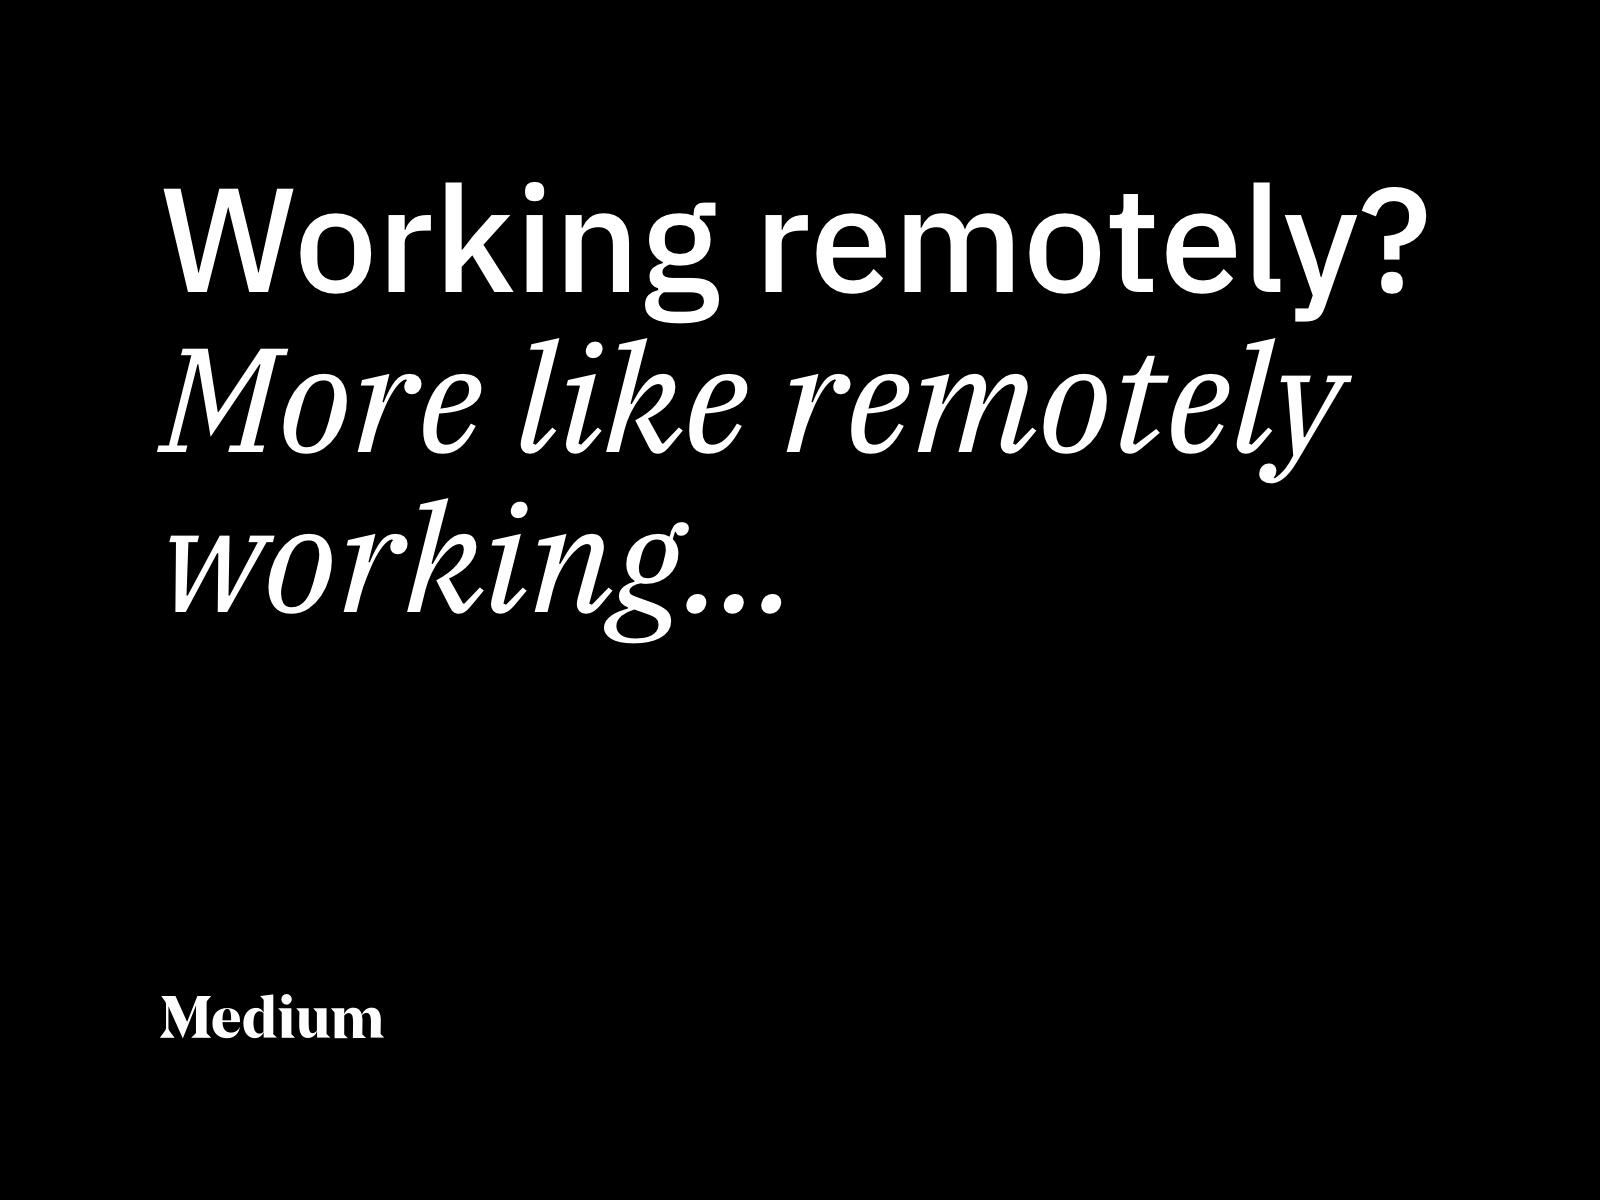 Working remotely? More like remotely working...